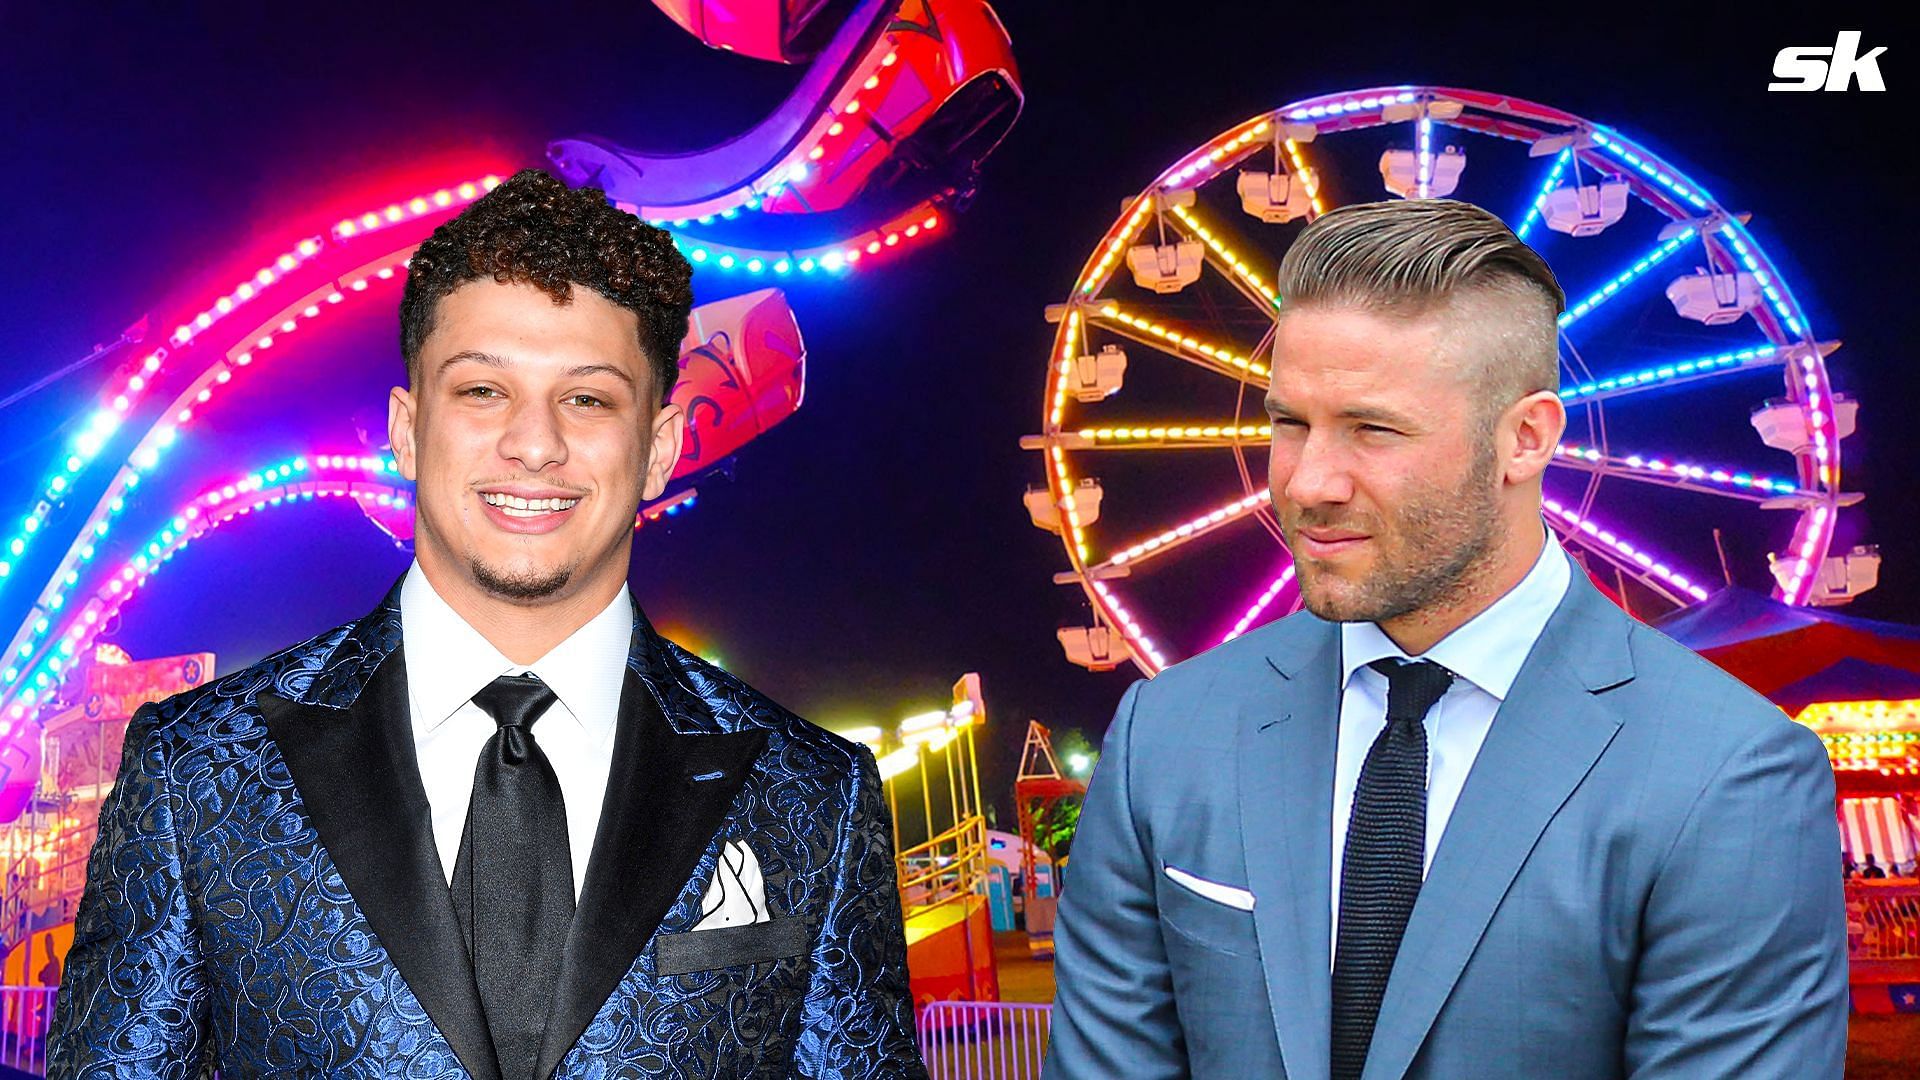 Edelman detailed his experience with Patrick Mahomes.